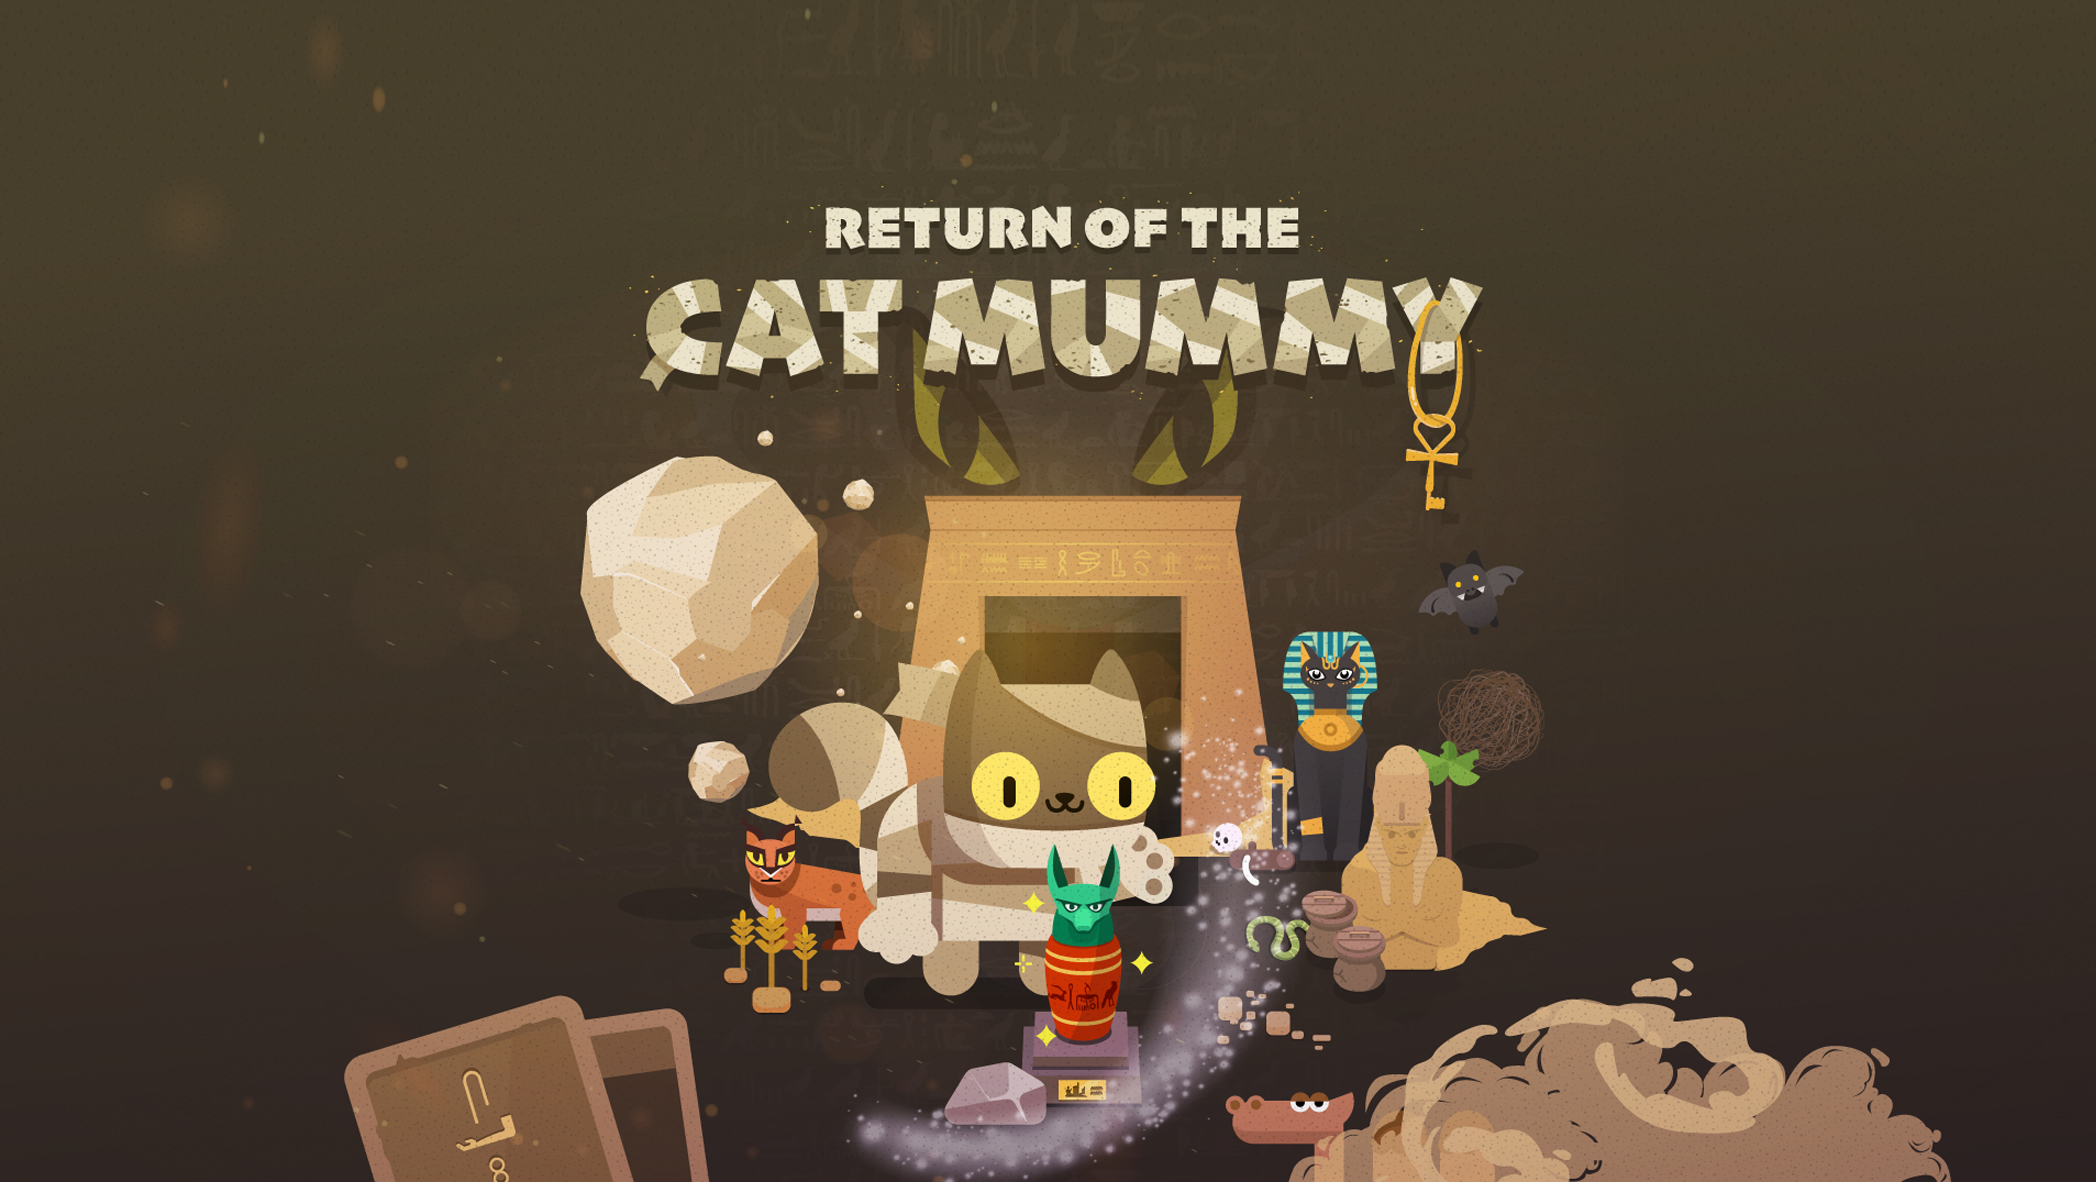 The Cat Game - Review - Mummy's Diary